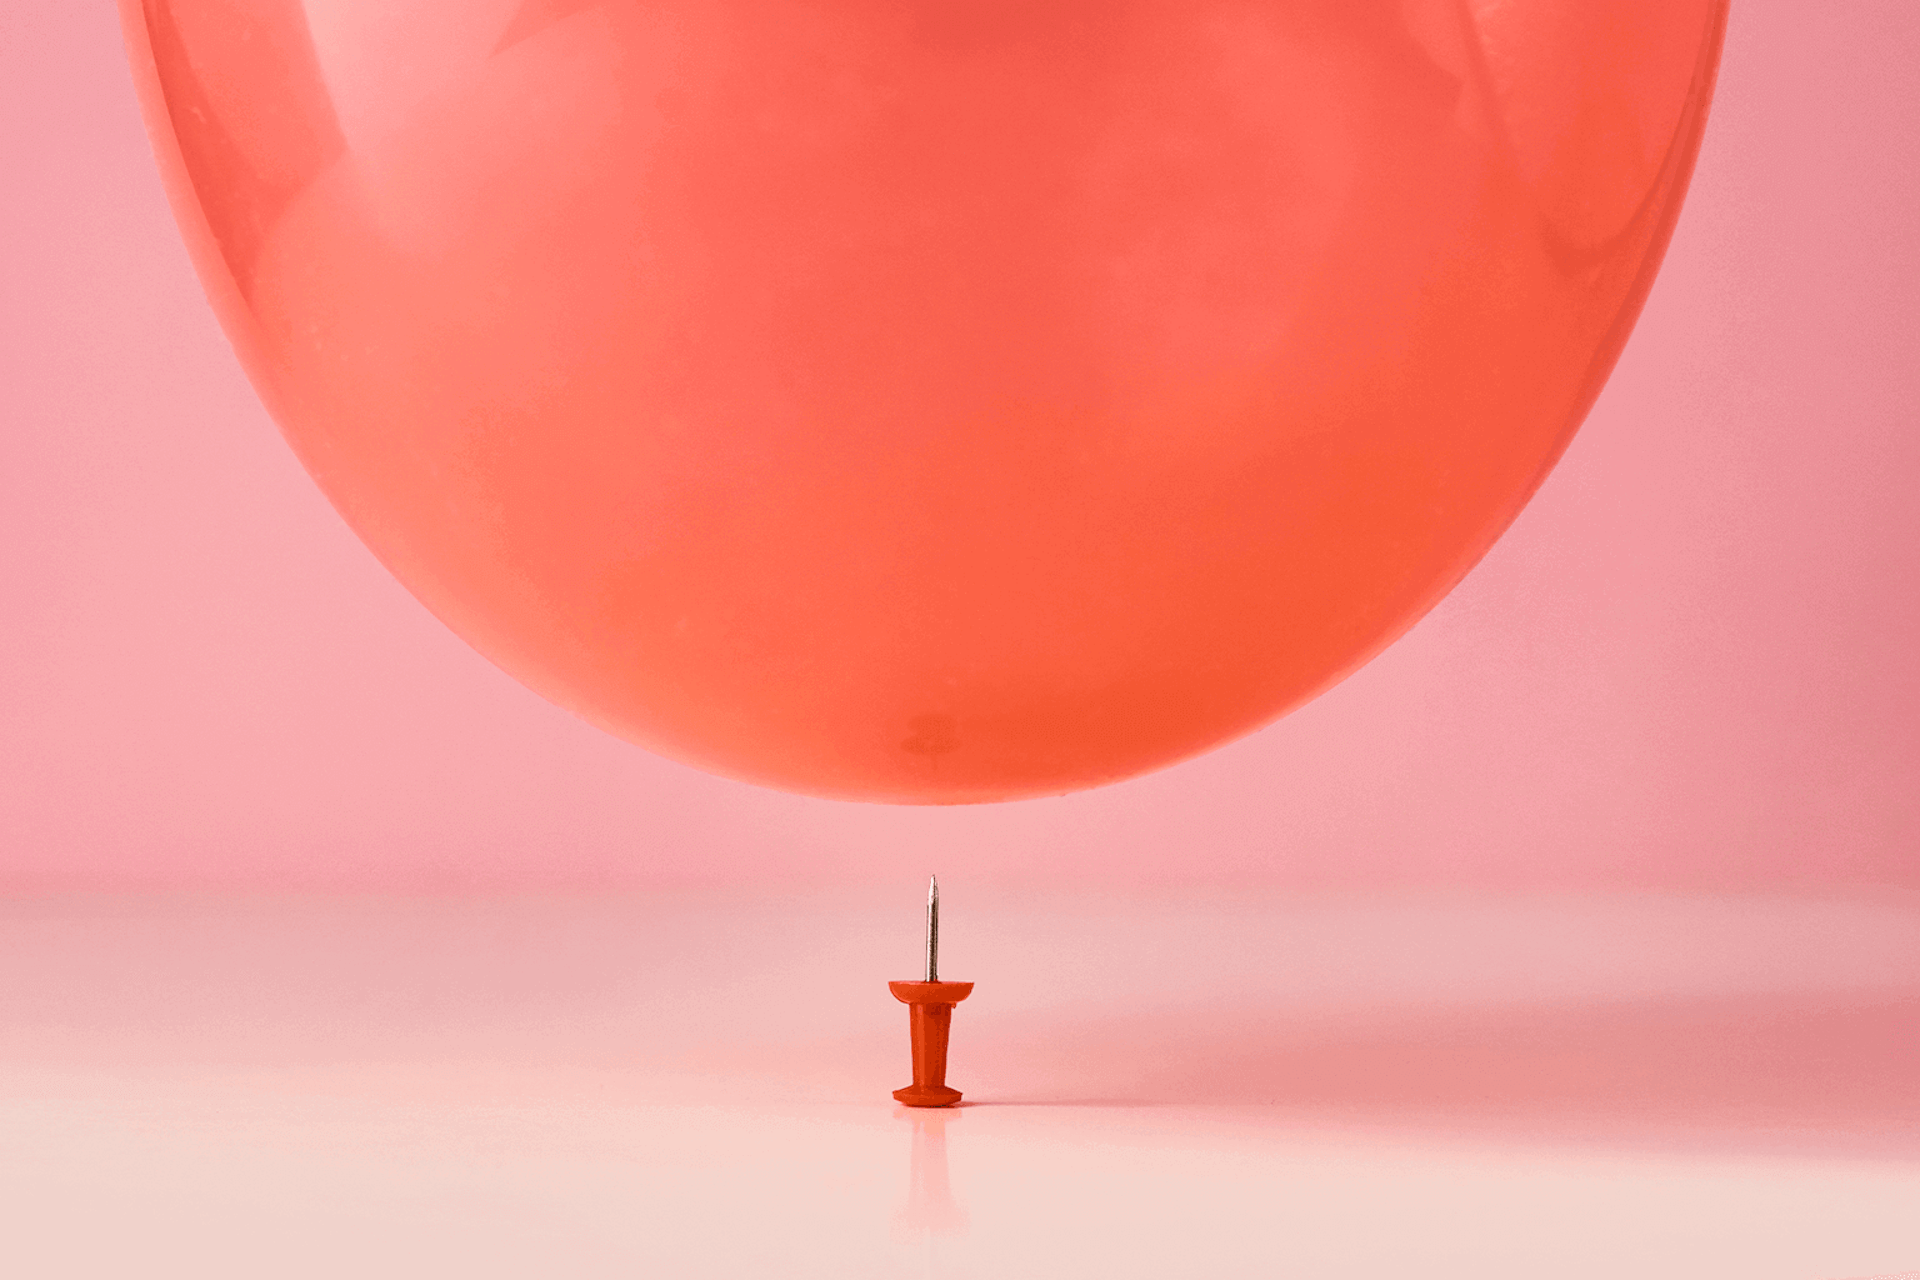 Image of a balloon almost getting popped by a needle